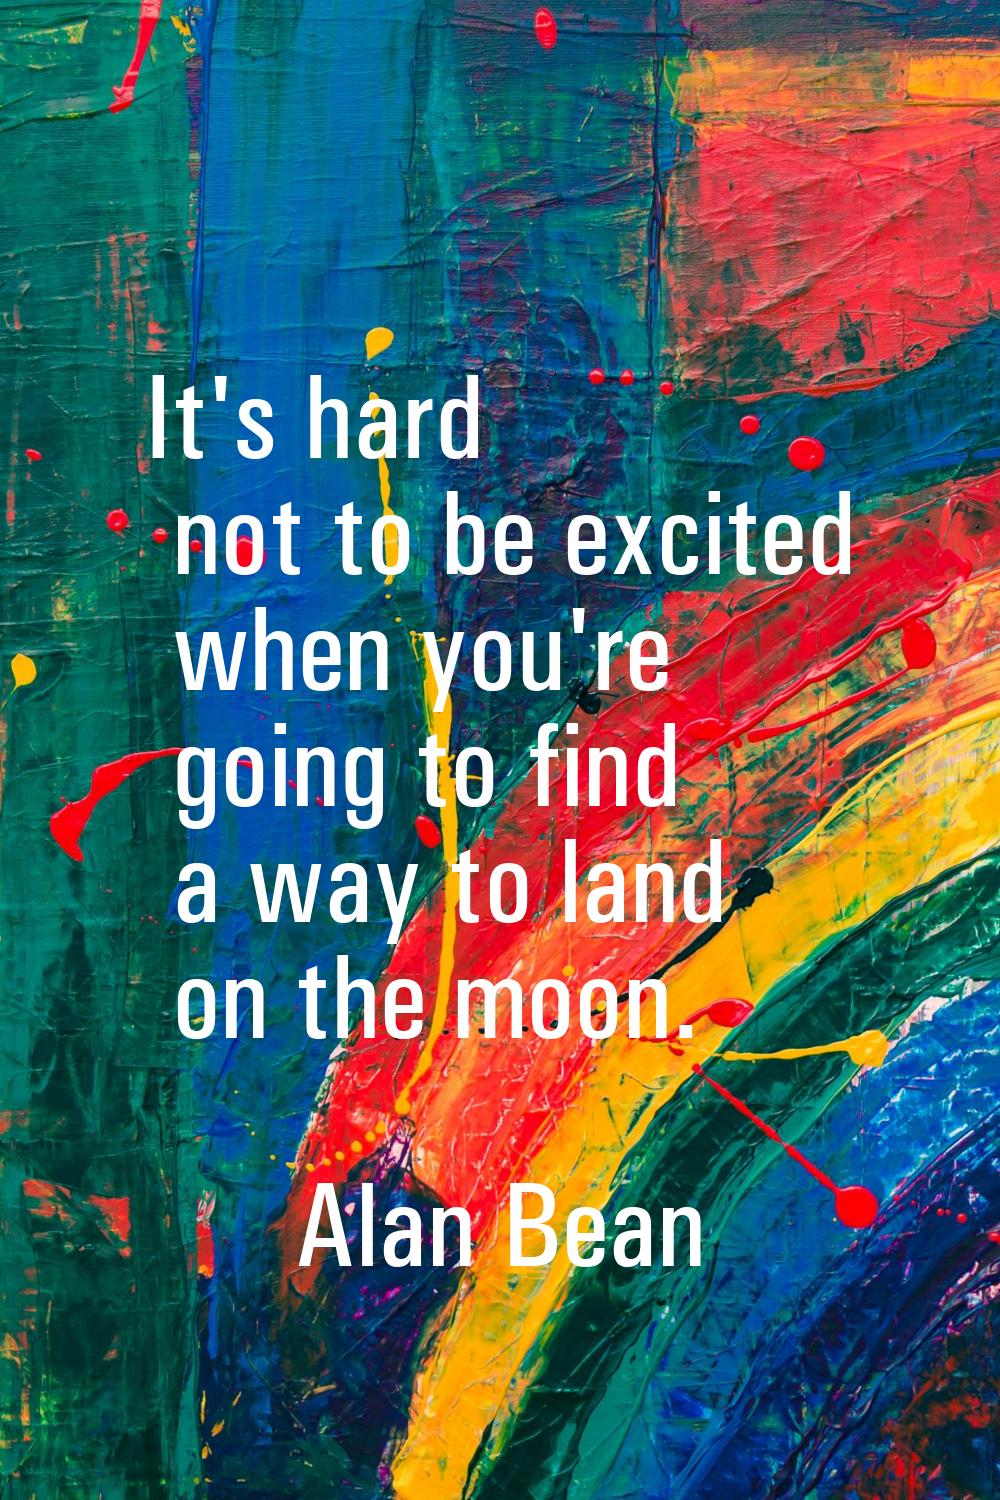 It's hard not to be excited when you're going to find a way to land on the moon.